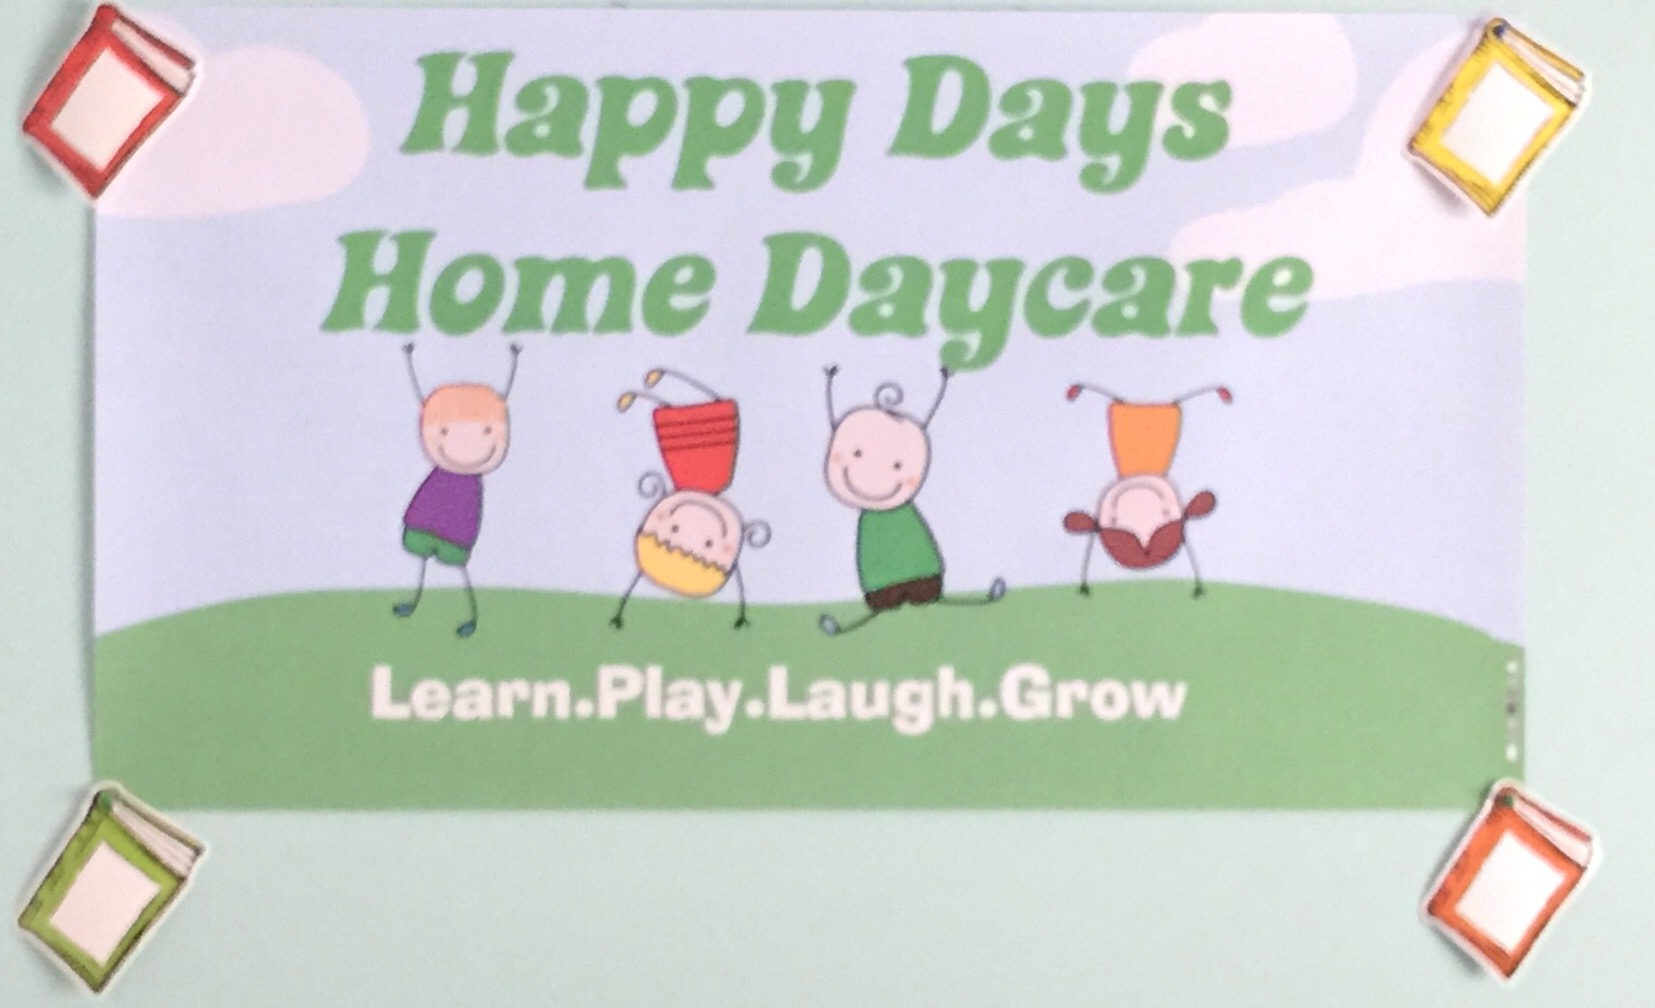 Happy Days Home Daycare